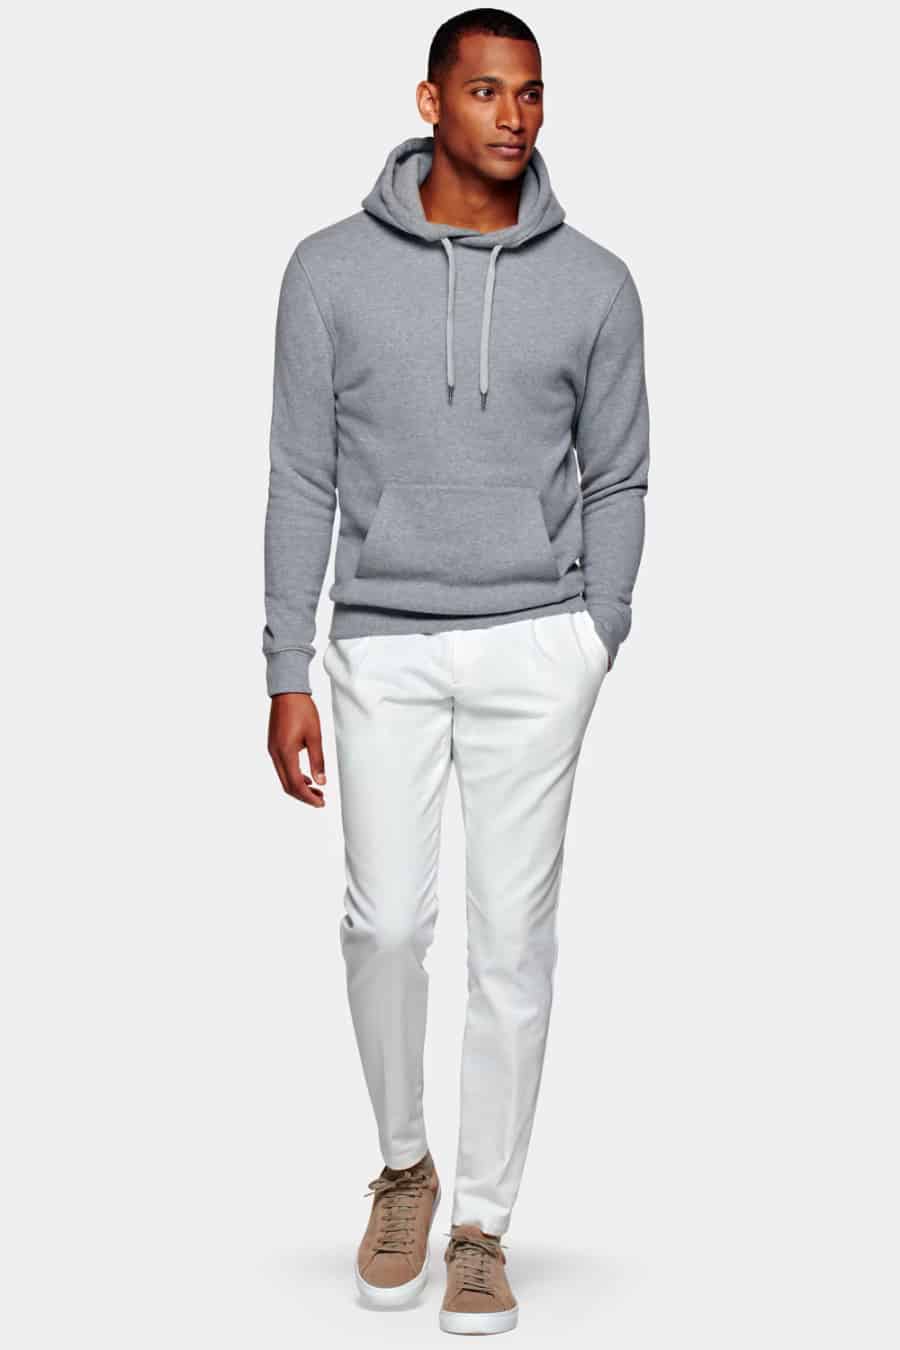 Men's white pants, luxe hoodie and suede sneakers outfit